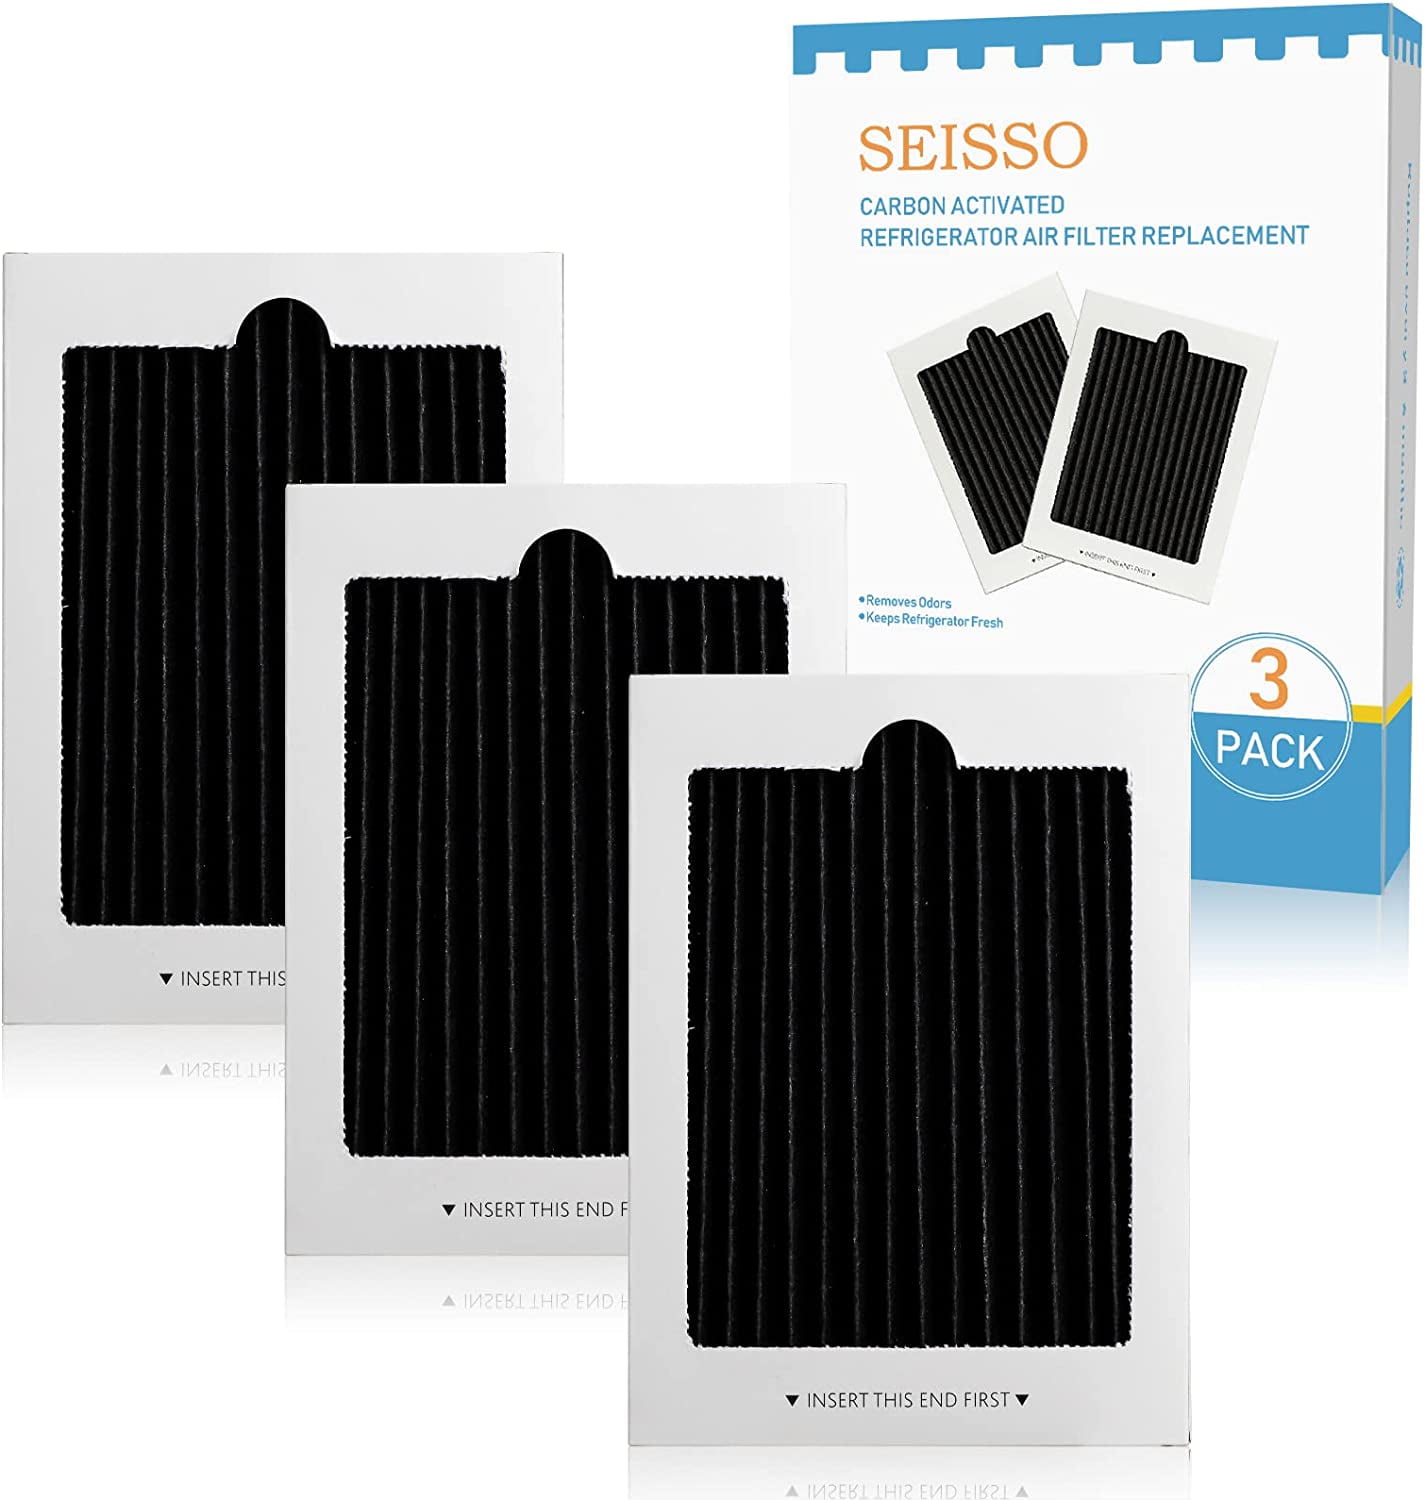 SEISSO Refrigerator Air Filter Replacement 6 Pack - Carbon Activated Filter Compatible with Frigidaire & Electrolux Pure Air Ultra Reduce Odors for